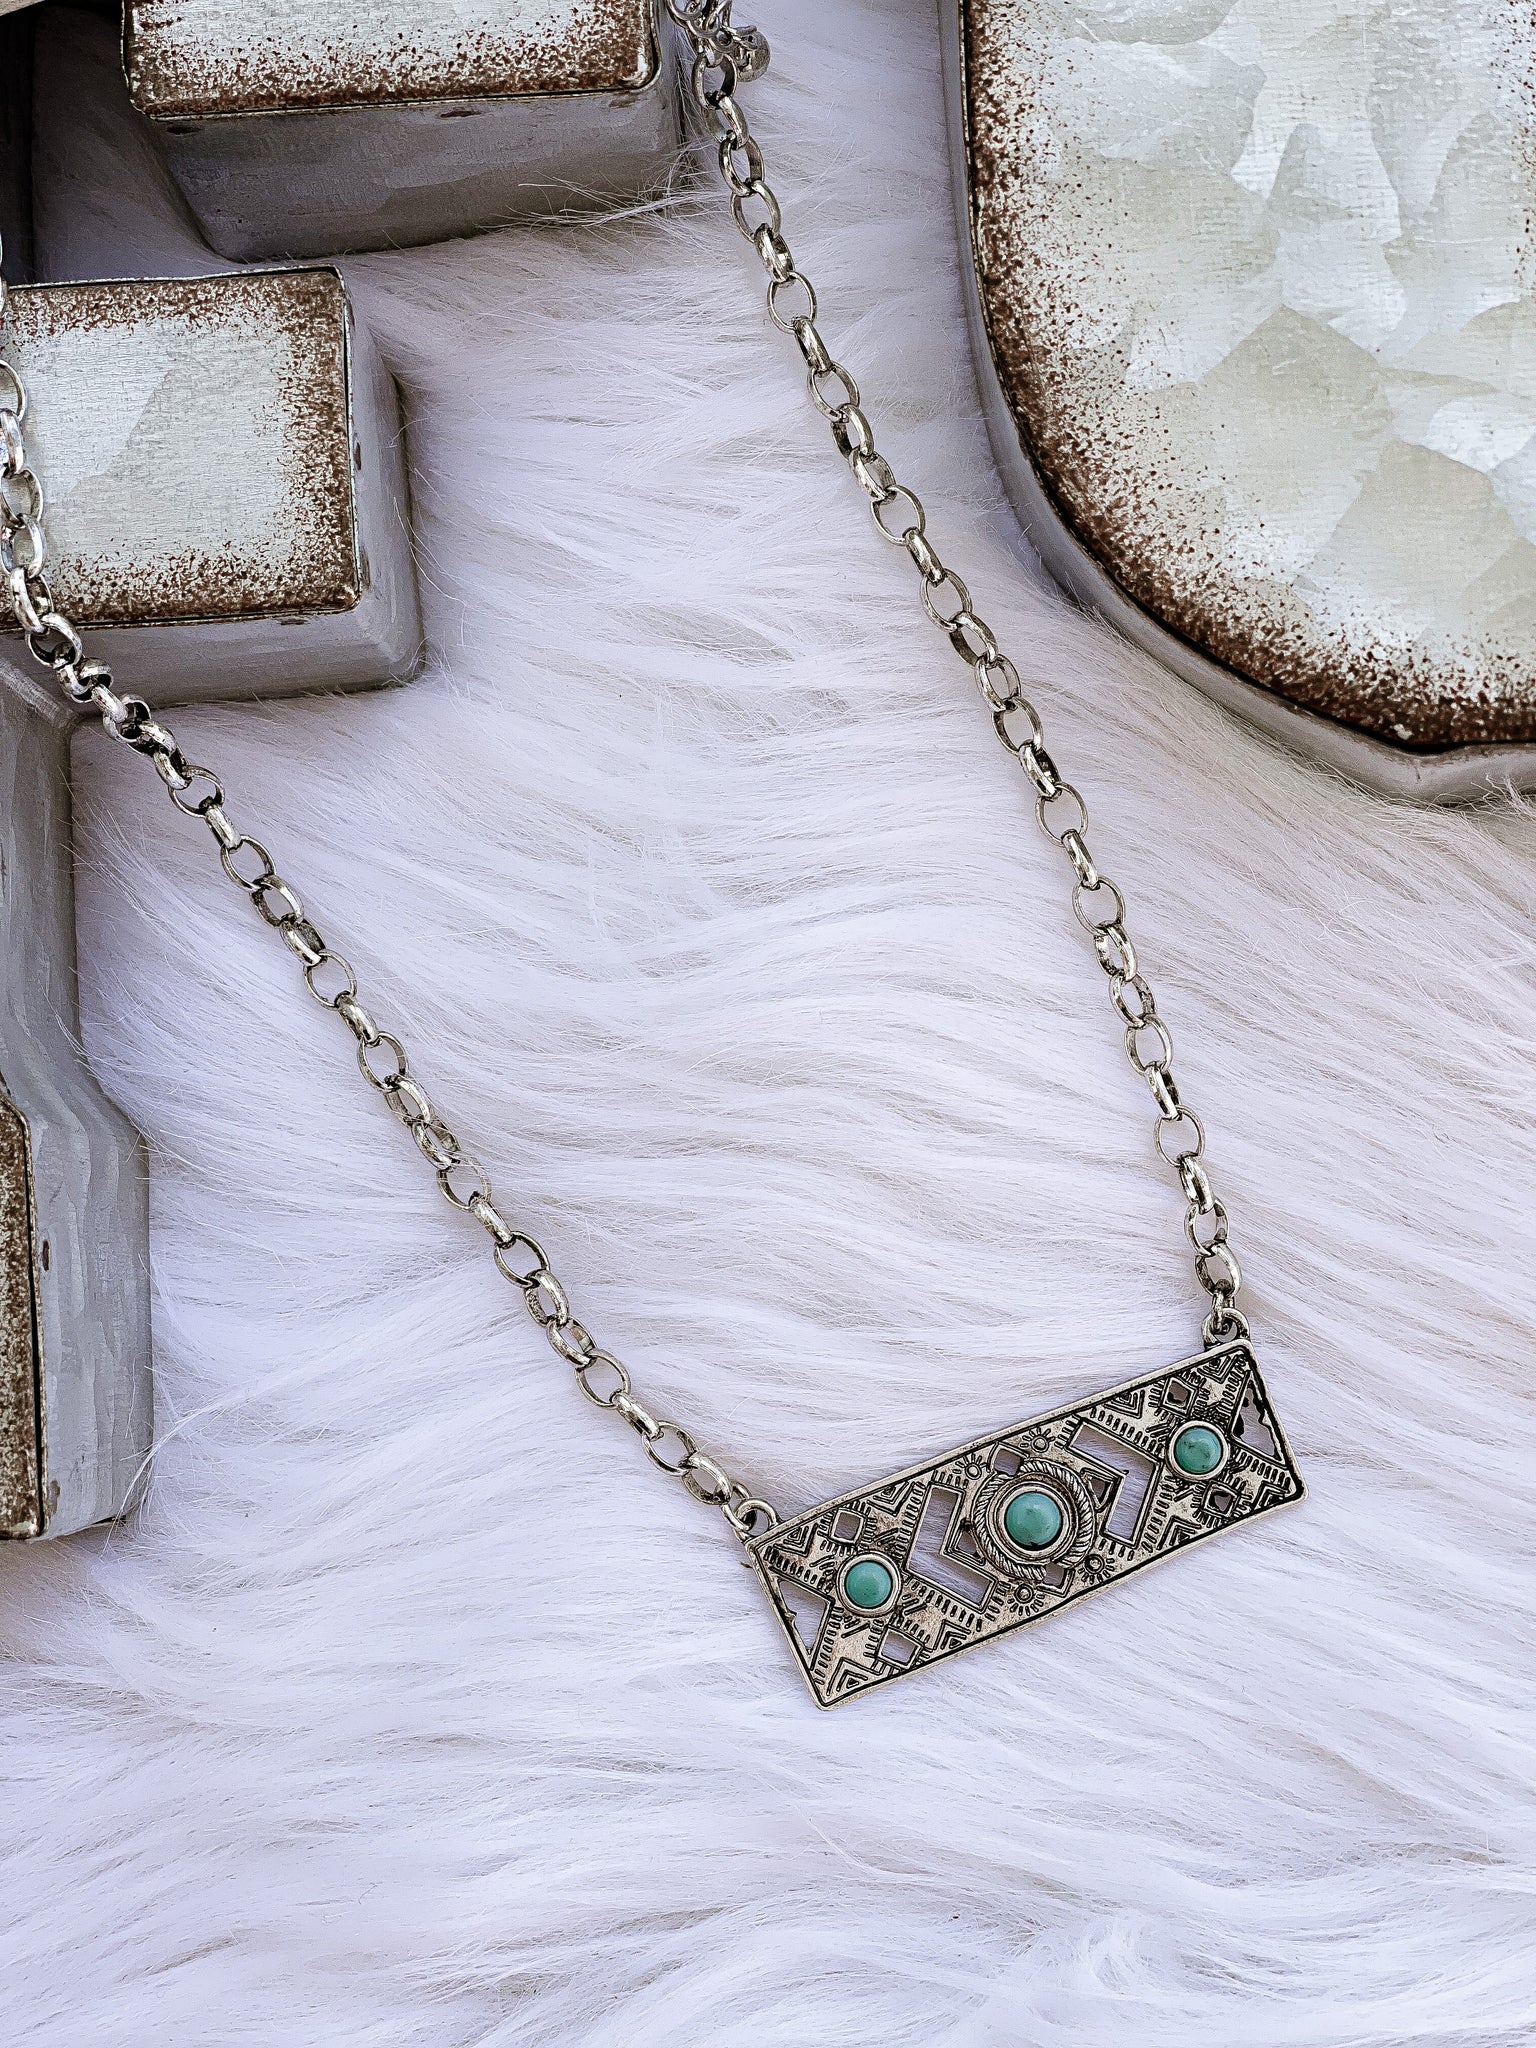 Turquoise Creek Silvertone Necklace